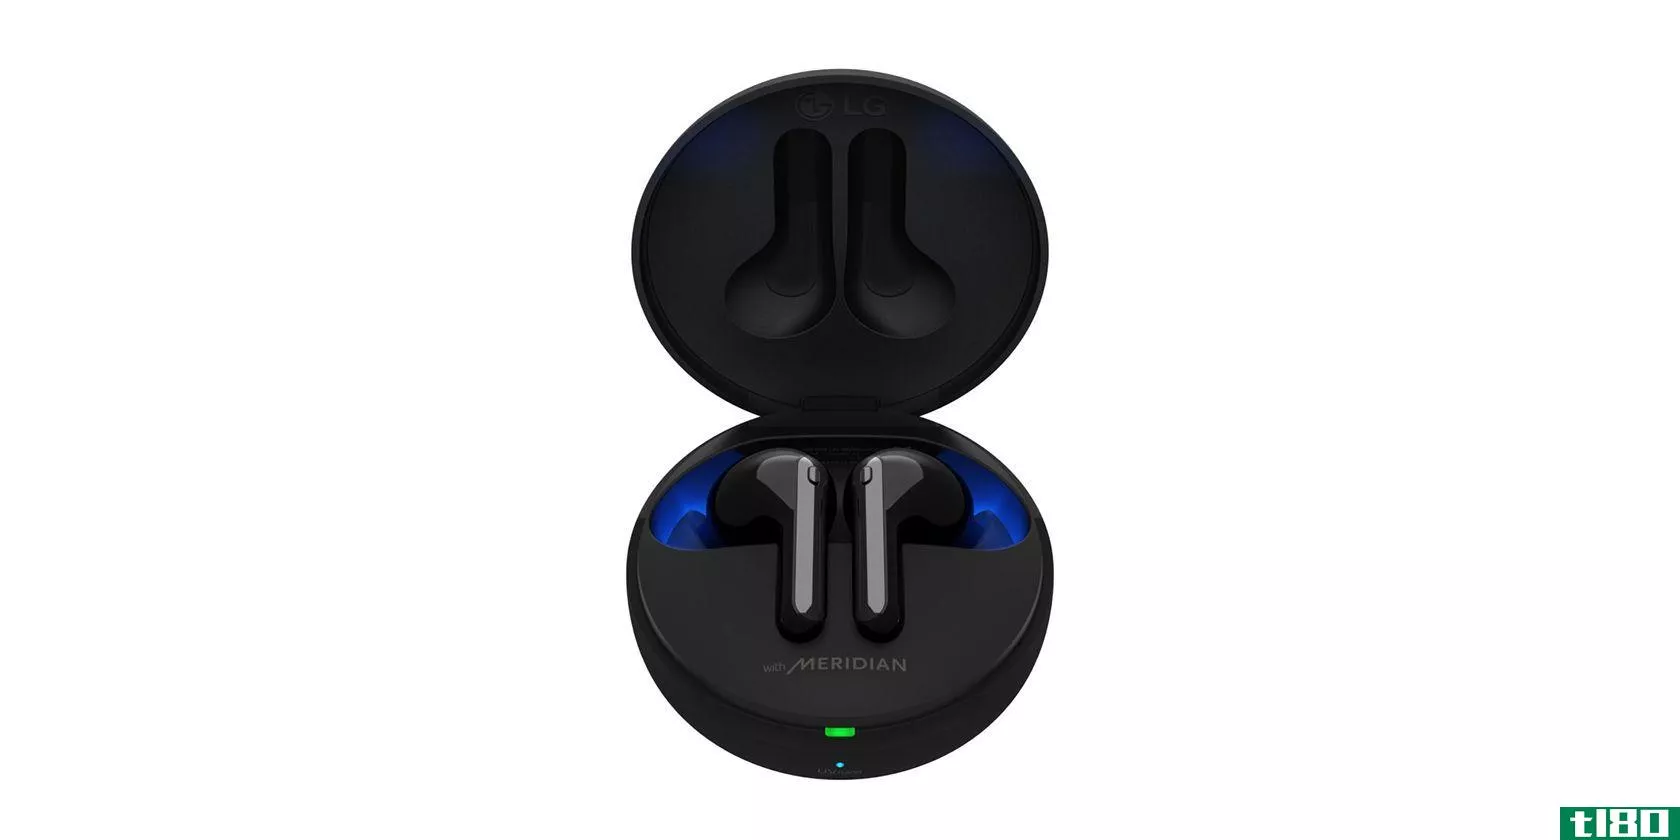 Tone Free FN7 earbuds